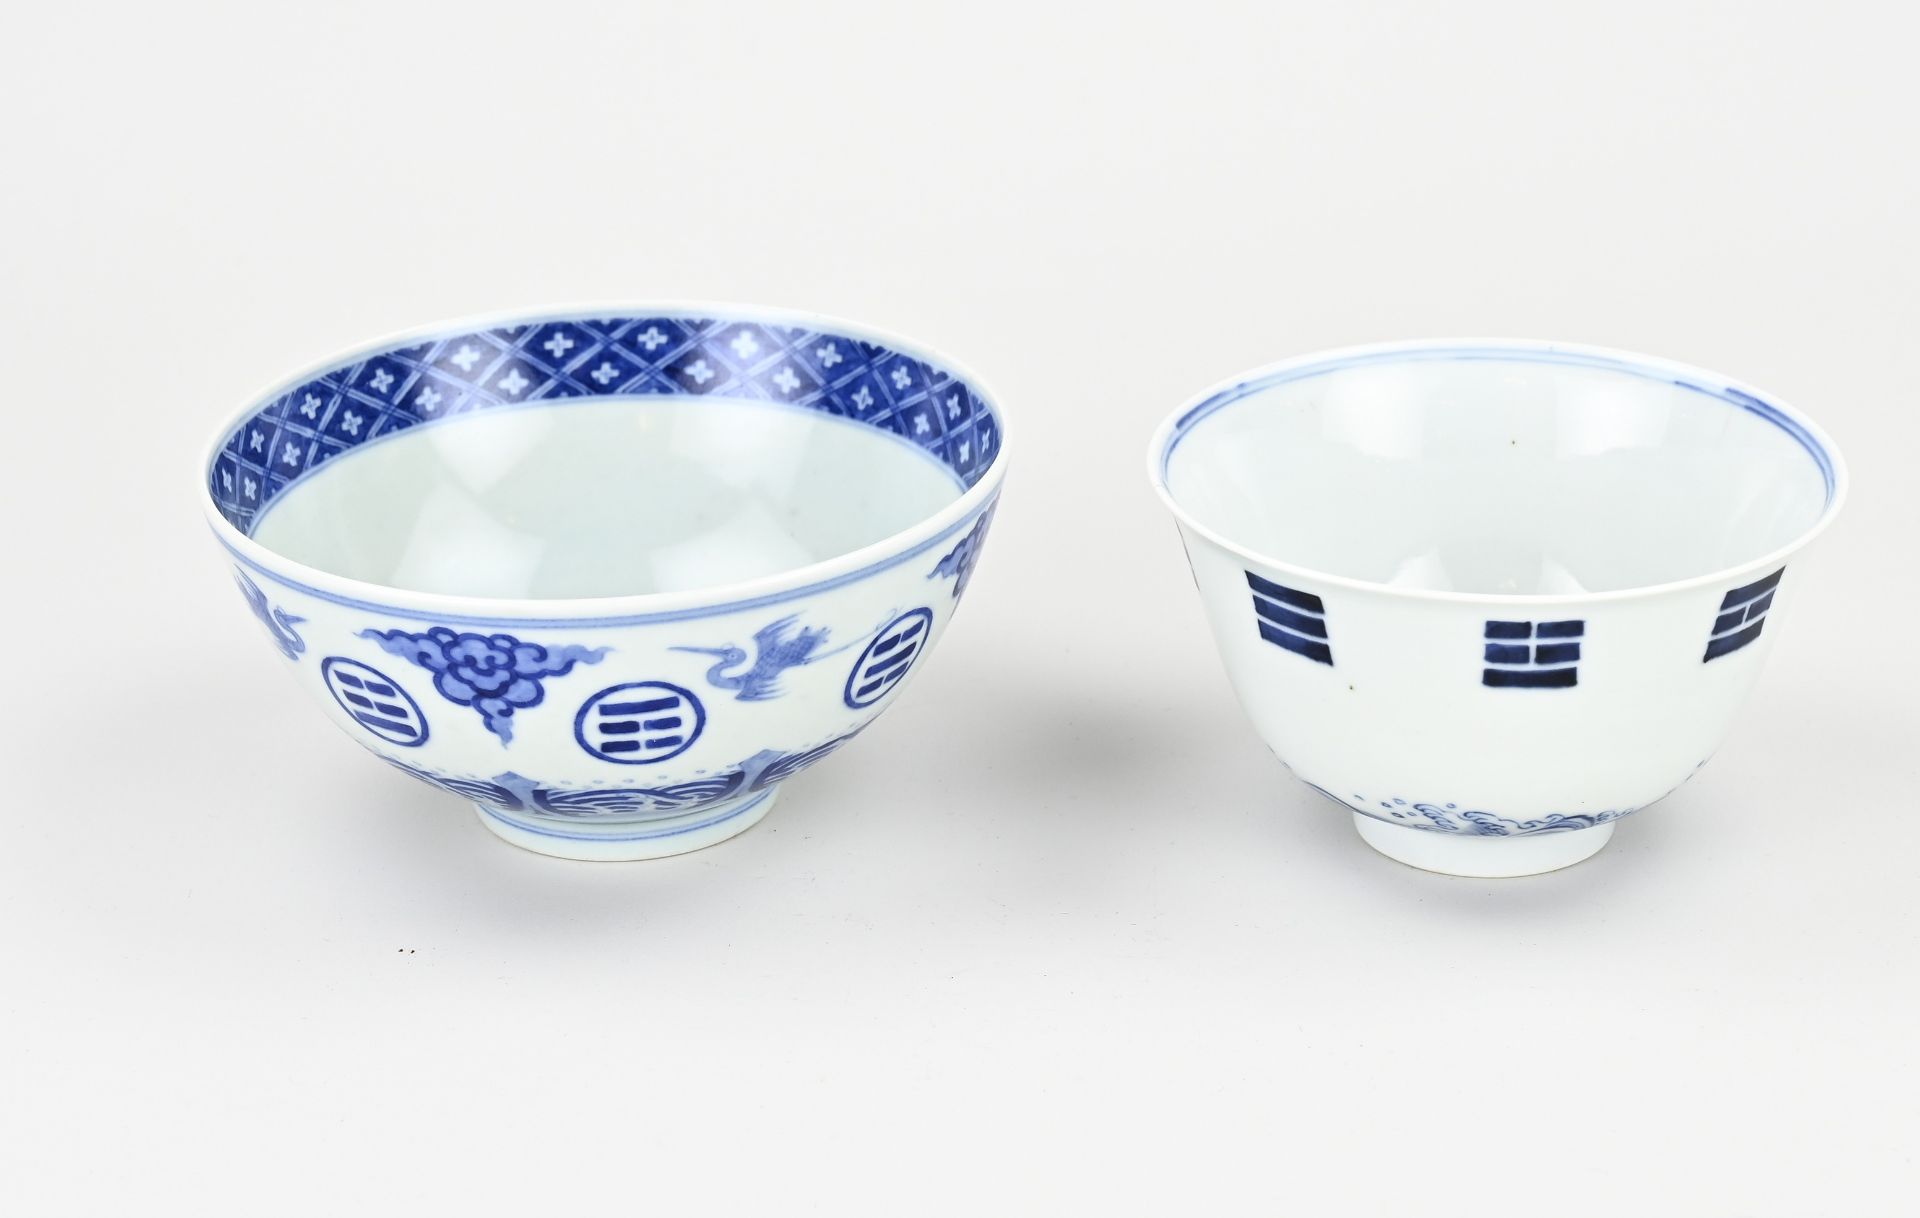 Two Chinese bowls